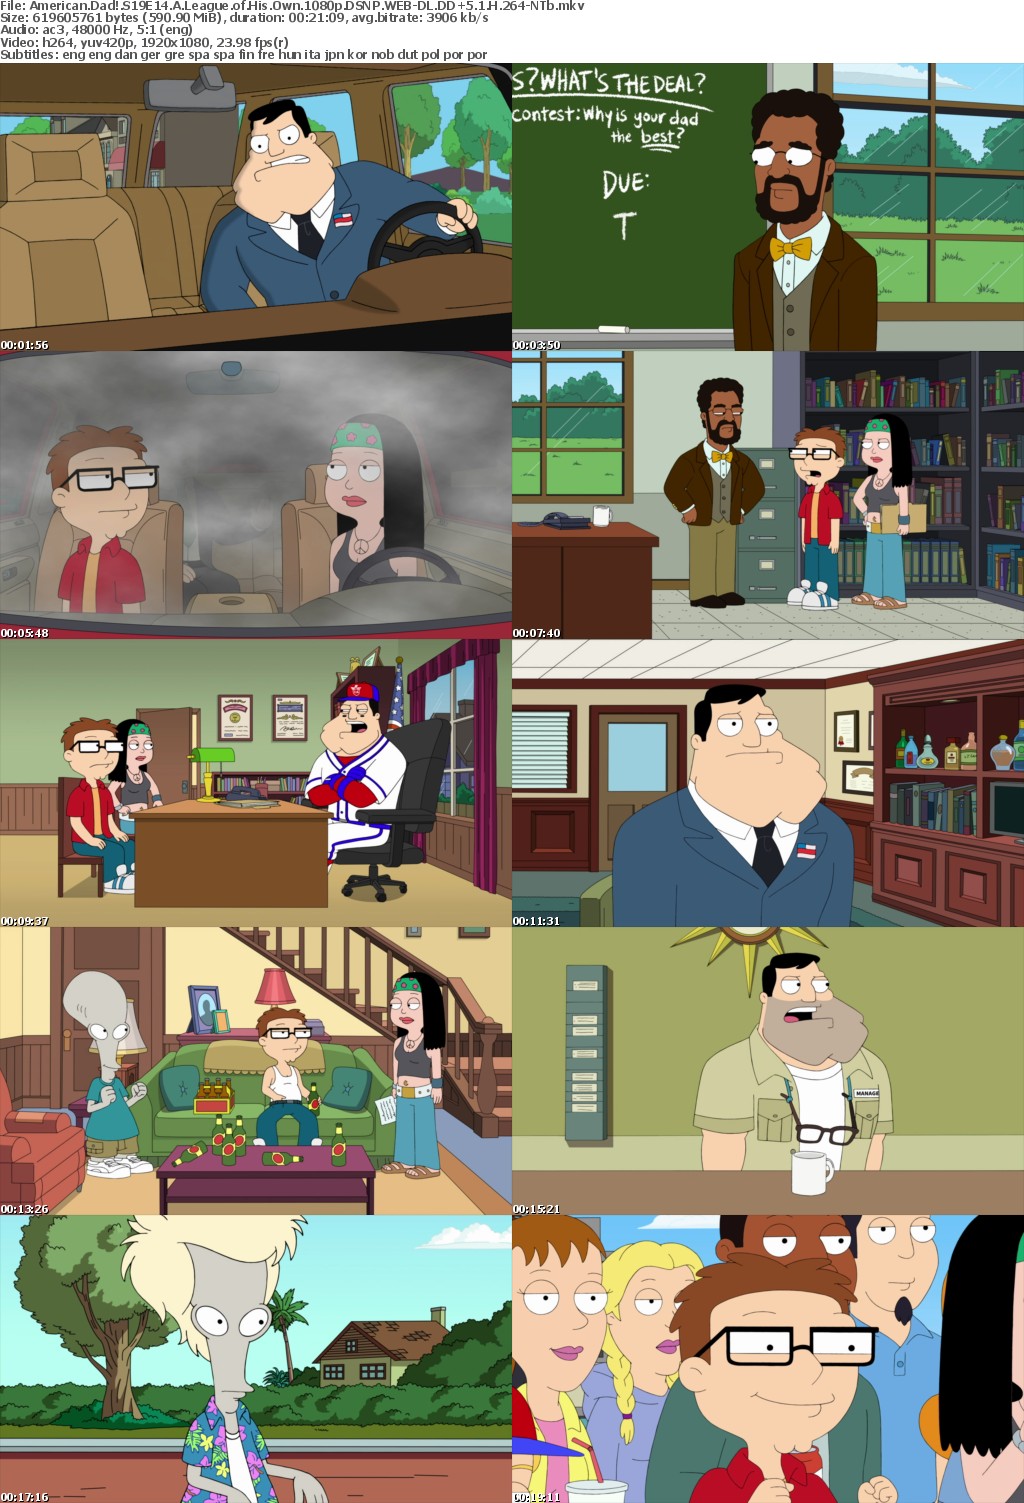 American Dad S19E14 A League of His Own 1080p DSNP WEBRip DDP5 1 x264-NTb